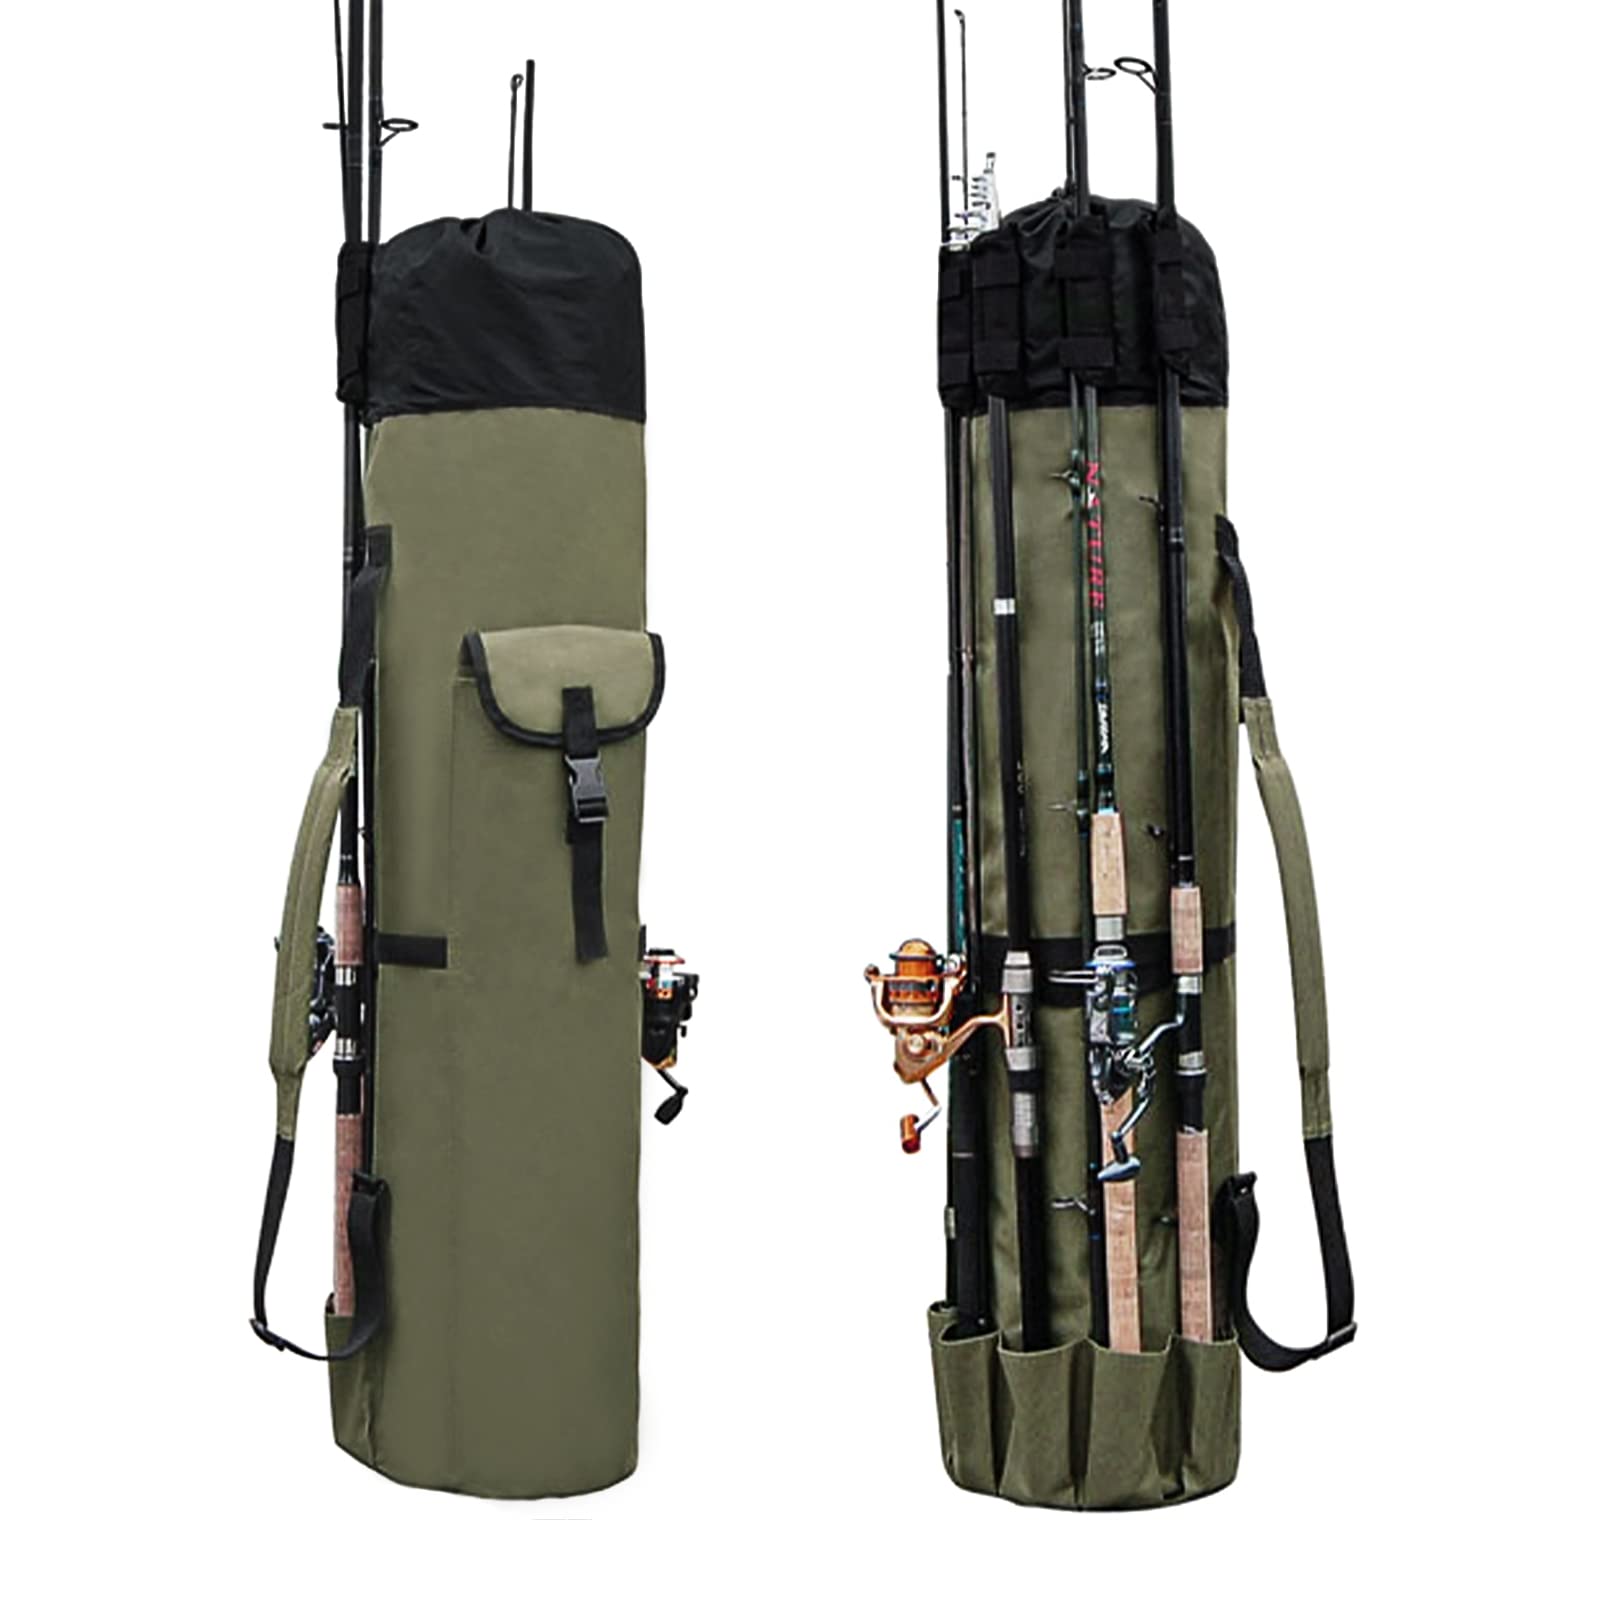 Wowelife Fishing Rod Carrier Fishing Reel Organizer Pole Storage Bag for  Fishing and Traveling,A Gift for Family Father, Daughter and Friends